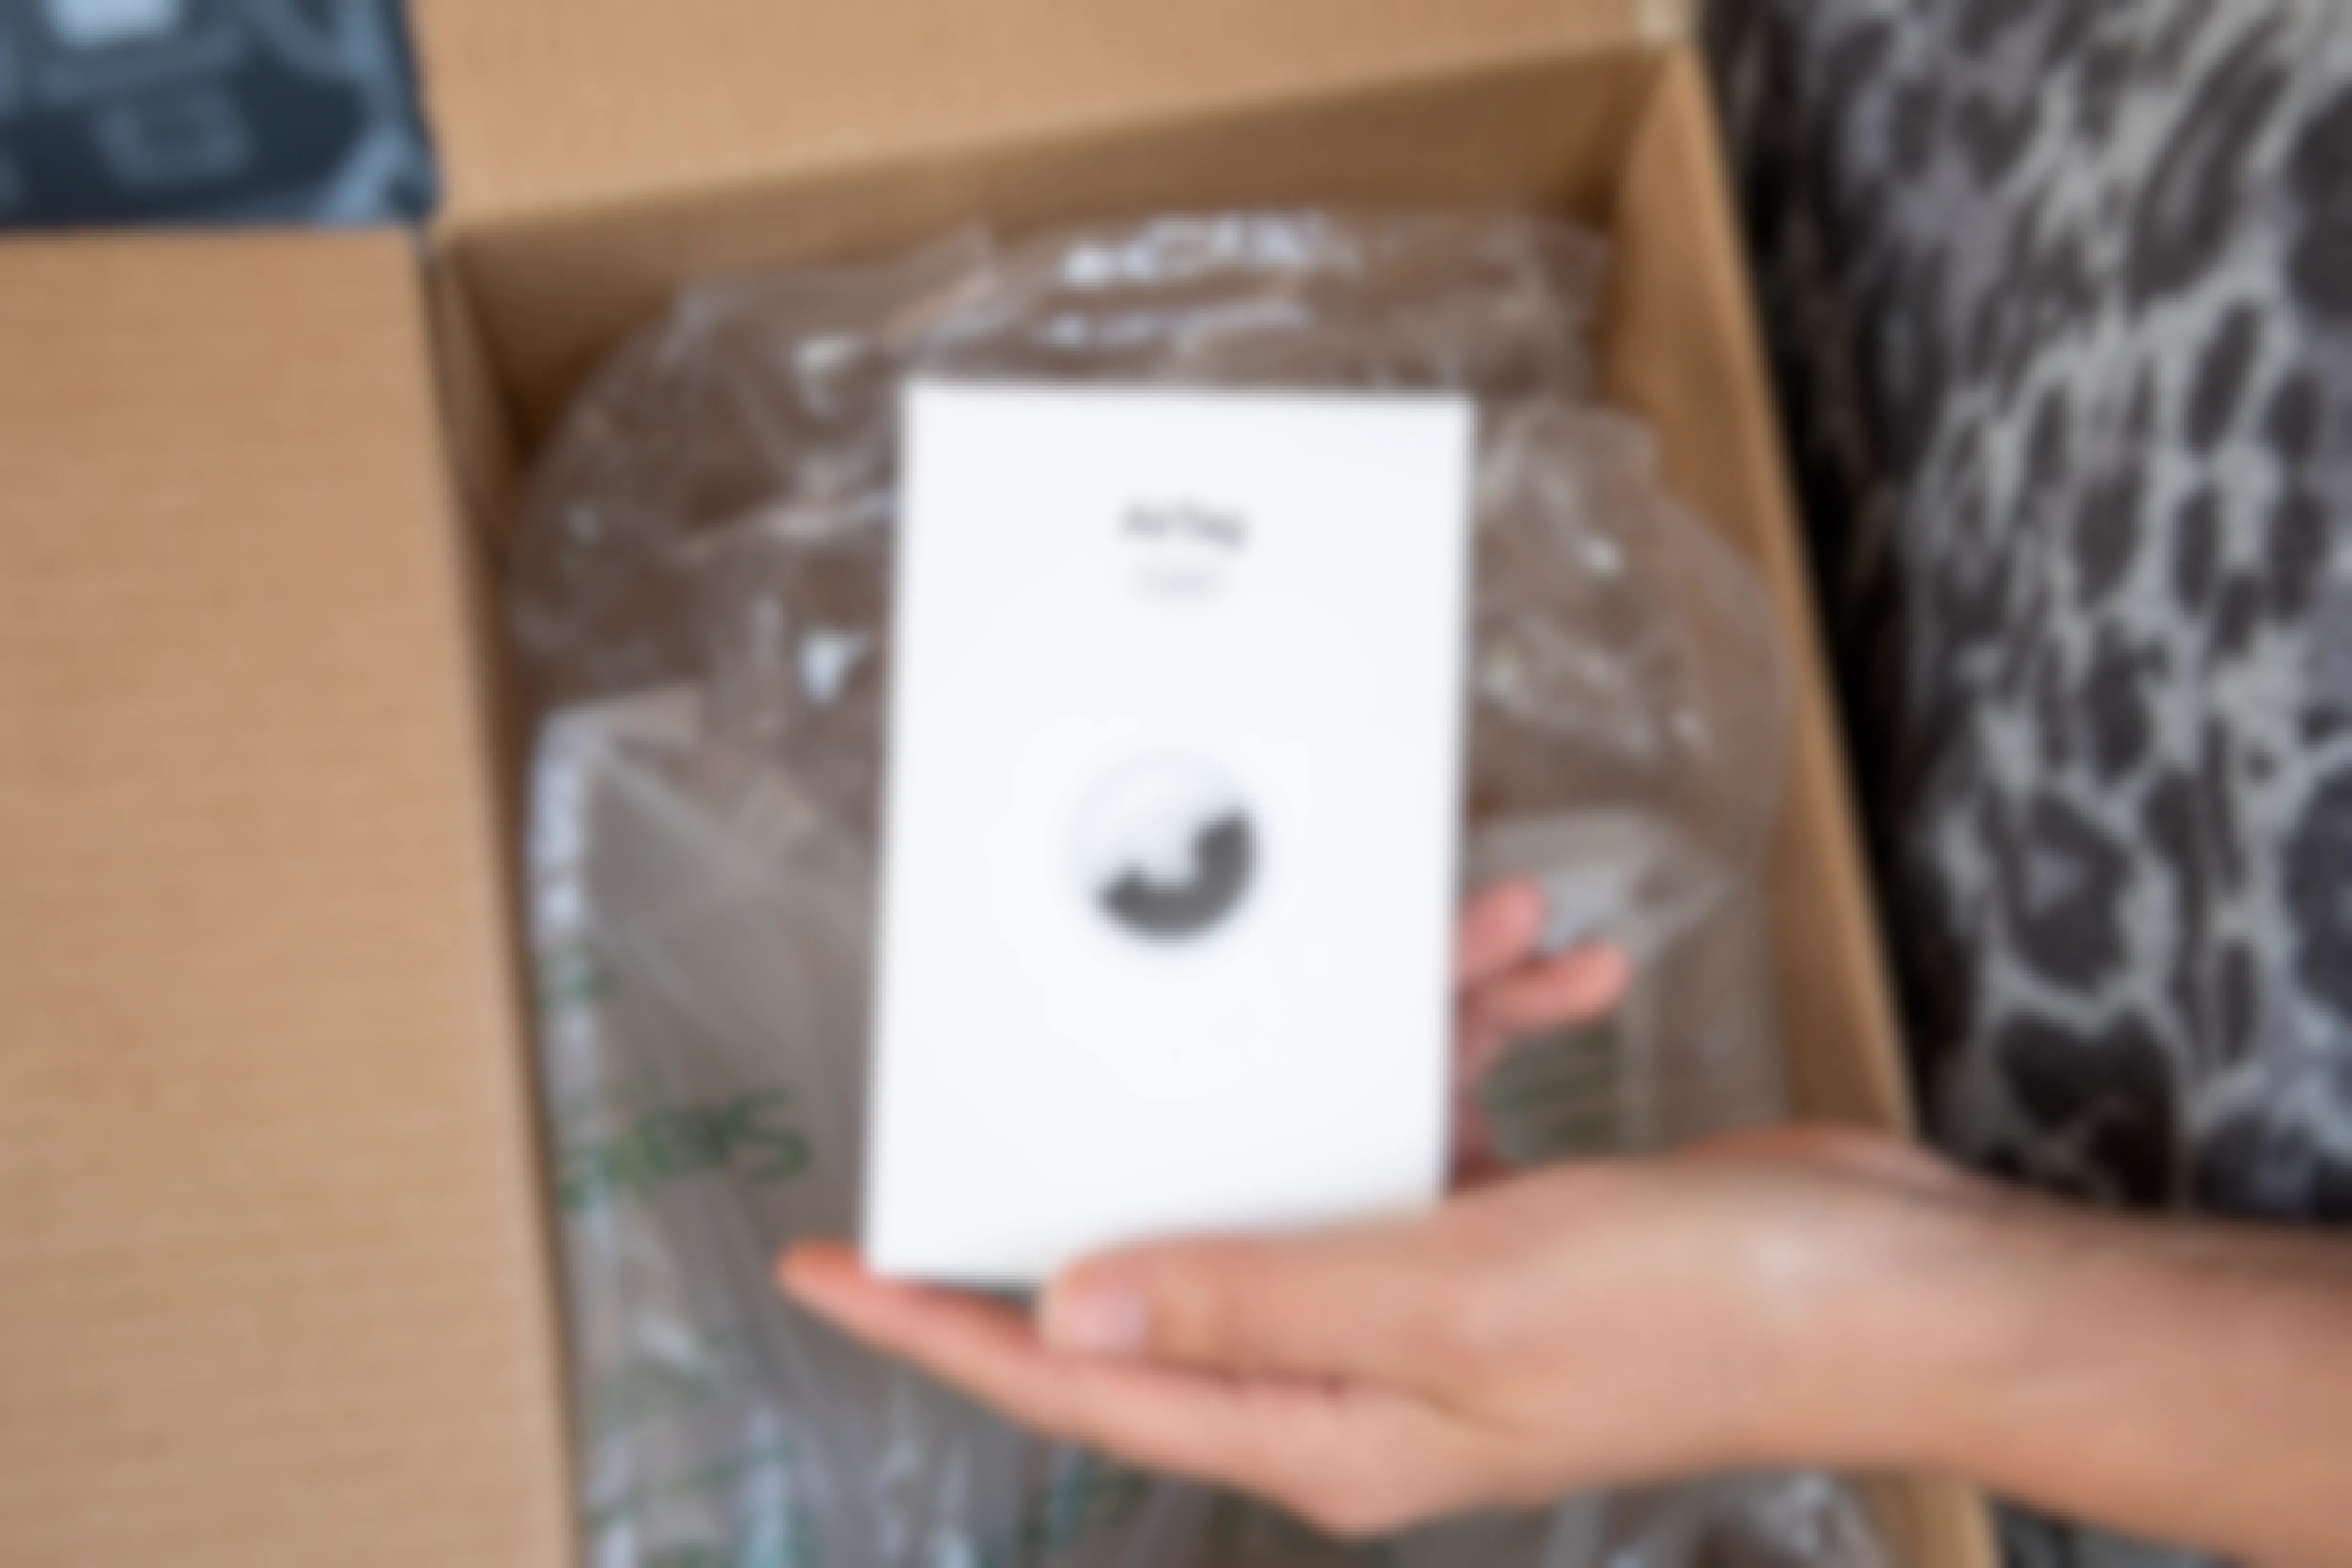 Apple AirTags at New 2023 Low Price on Amazon — Get 4 for $80